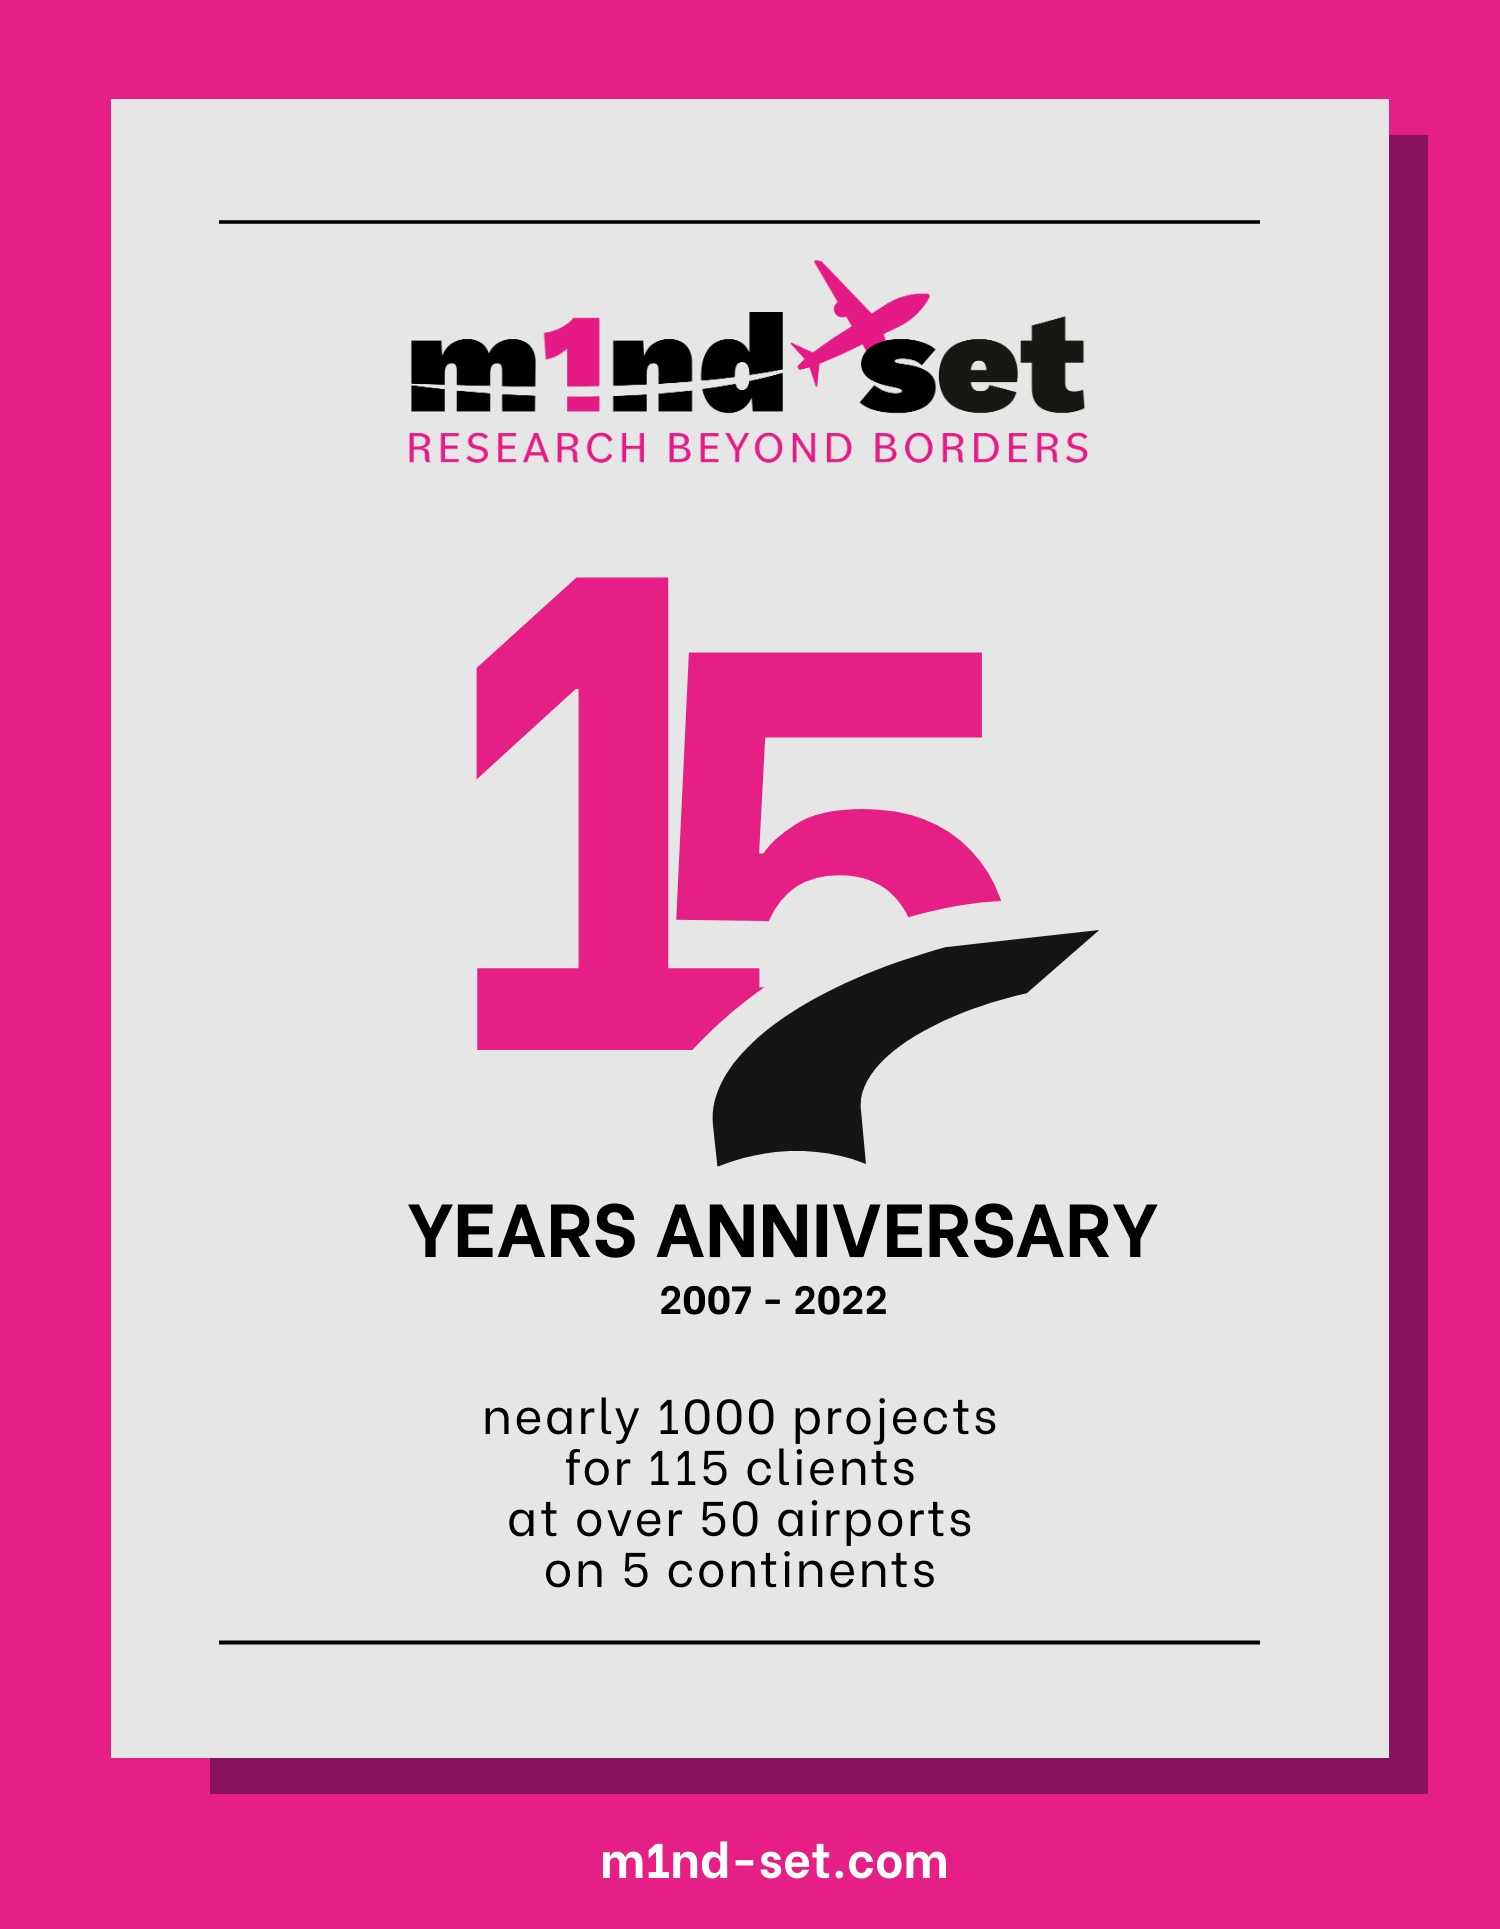 m1nd-set marks 15th anniversary with new corporate identity